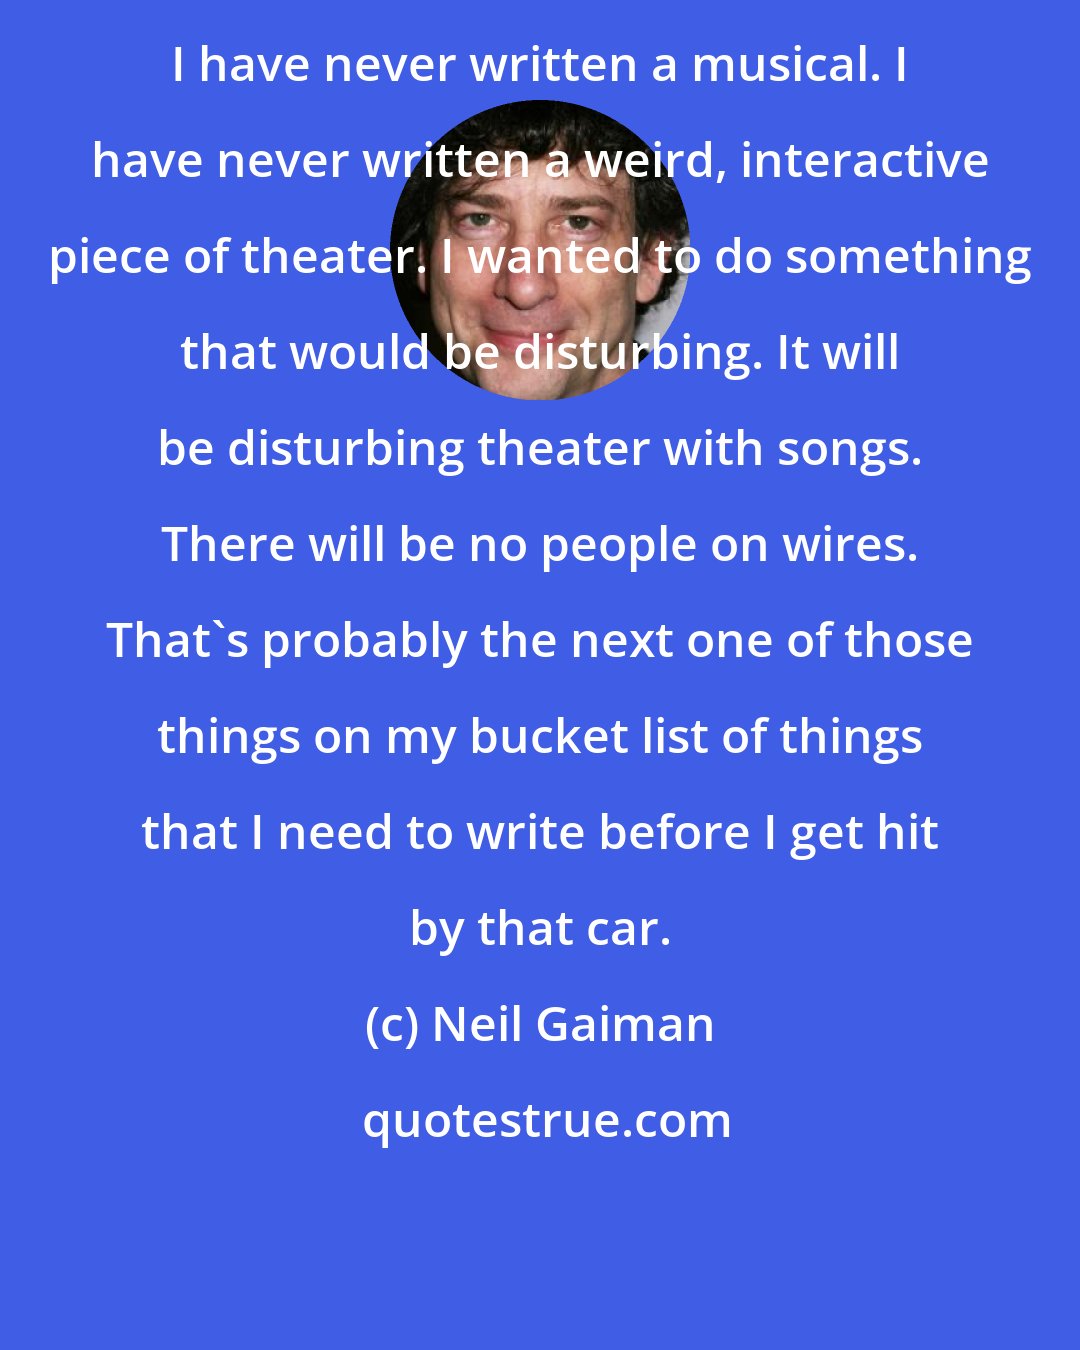 Neil Gaiman: I have never written a musical. I have never written a weird, interactive piece of theater. I wanted to do something that would be disturbing. It will be disturbing theater with songs. There will be no people on wires. That's probably the next one of those things on my bucket list of things that I need to write before I get hit by that car.